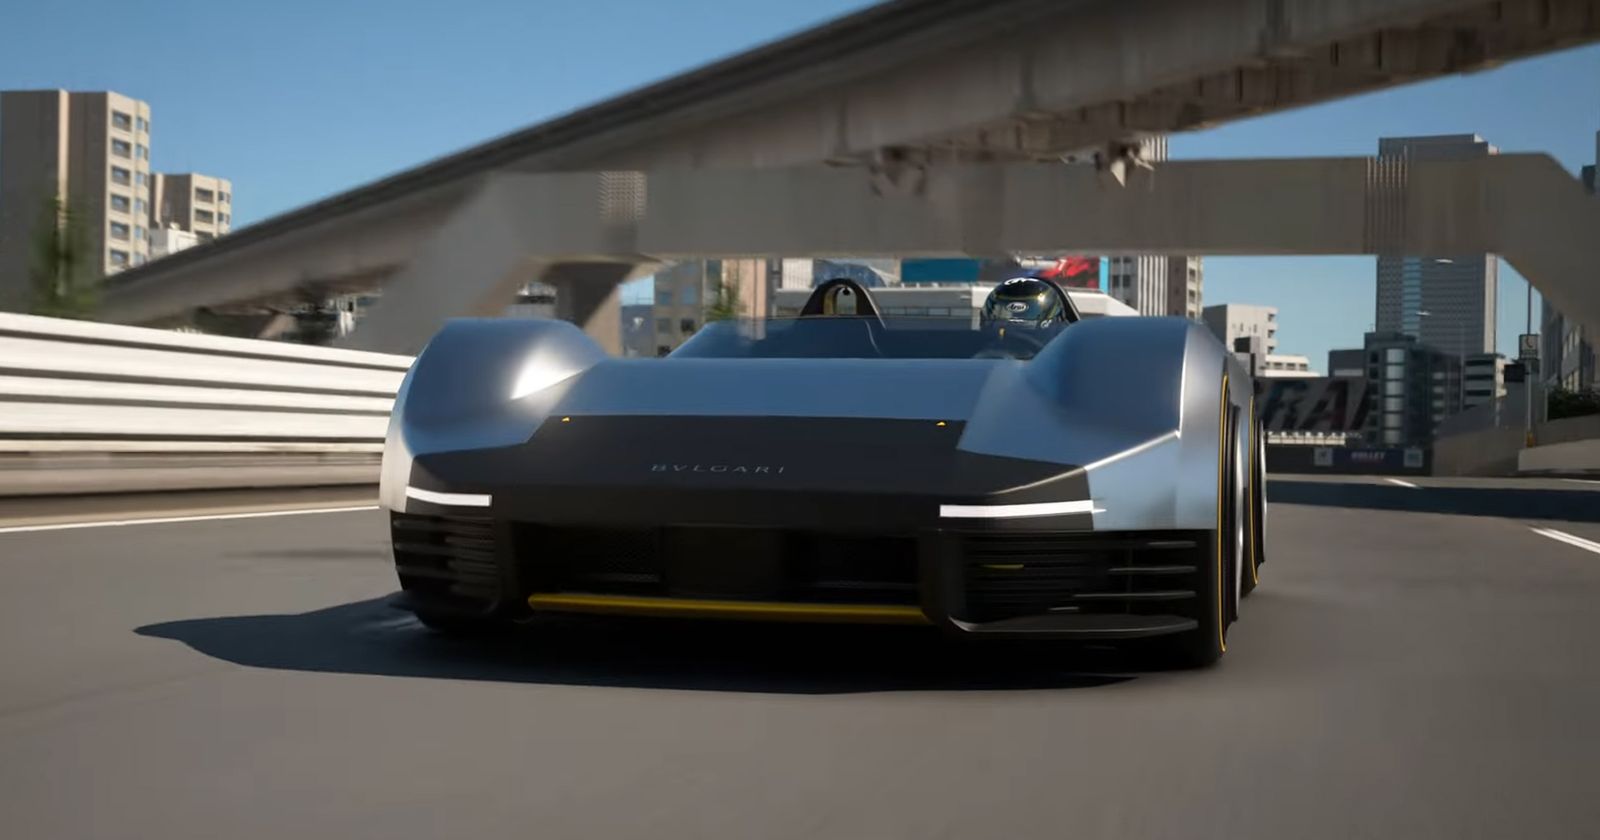 This is Bulgari's Vision GT Car, Coming to Gran Turismo 7 Soon – GTPlanet